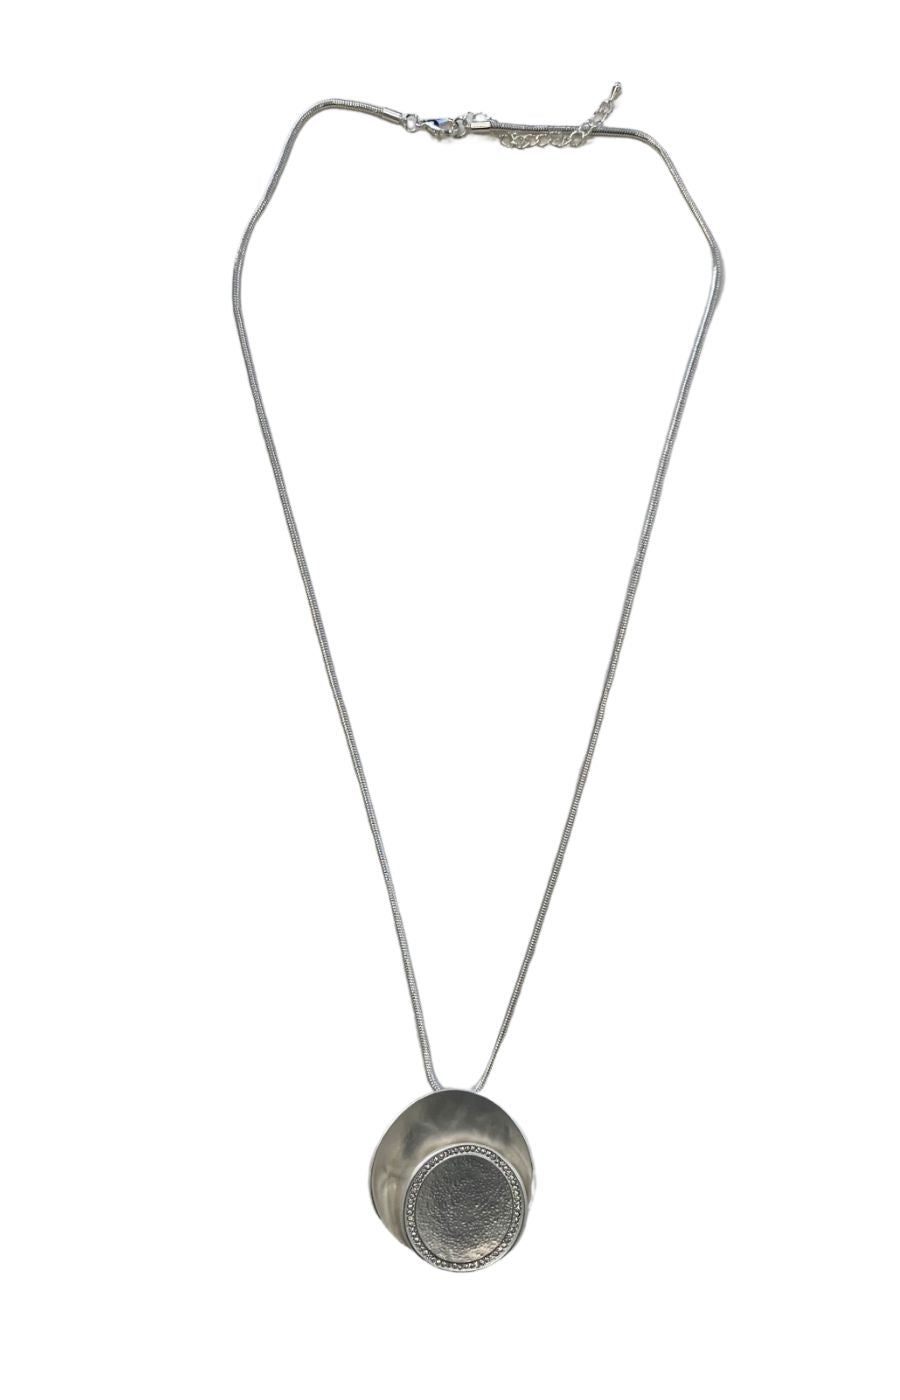 Bex Necklace in Silver